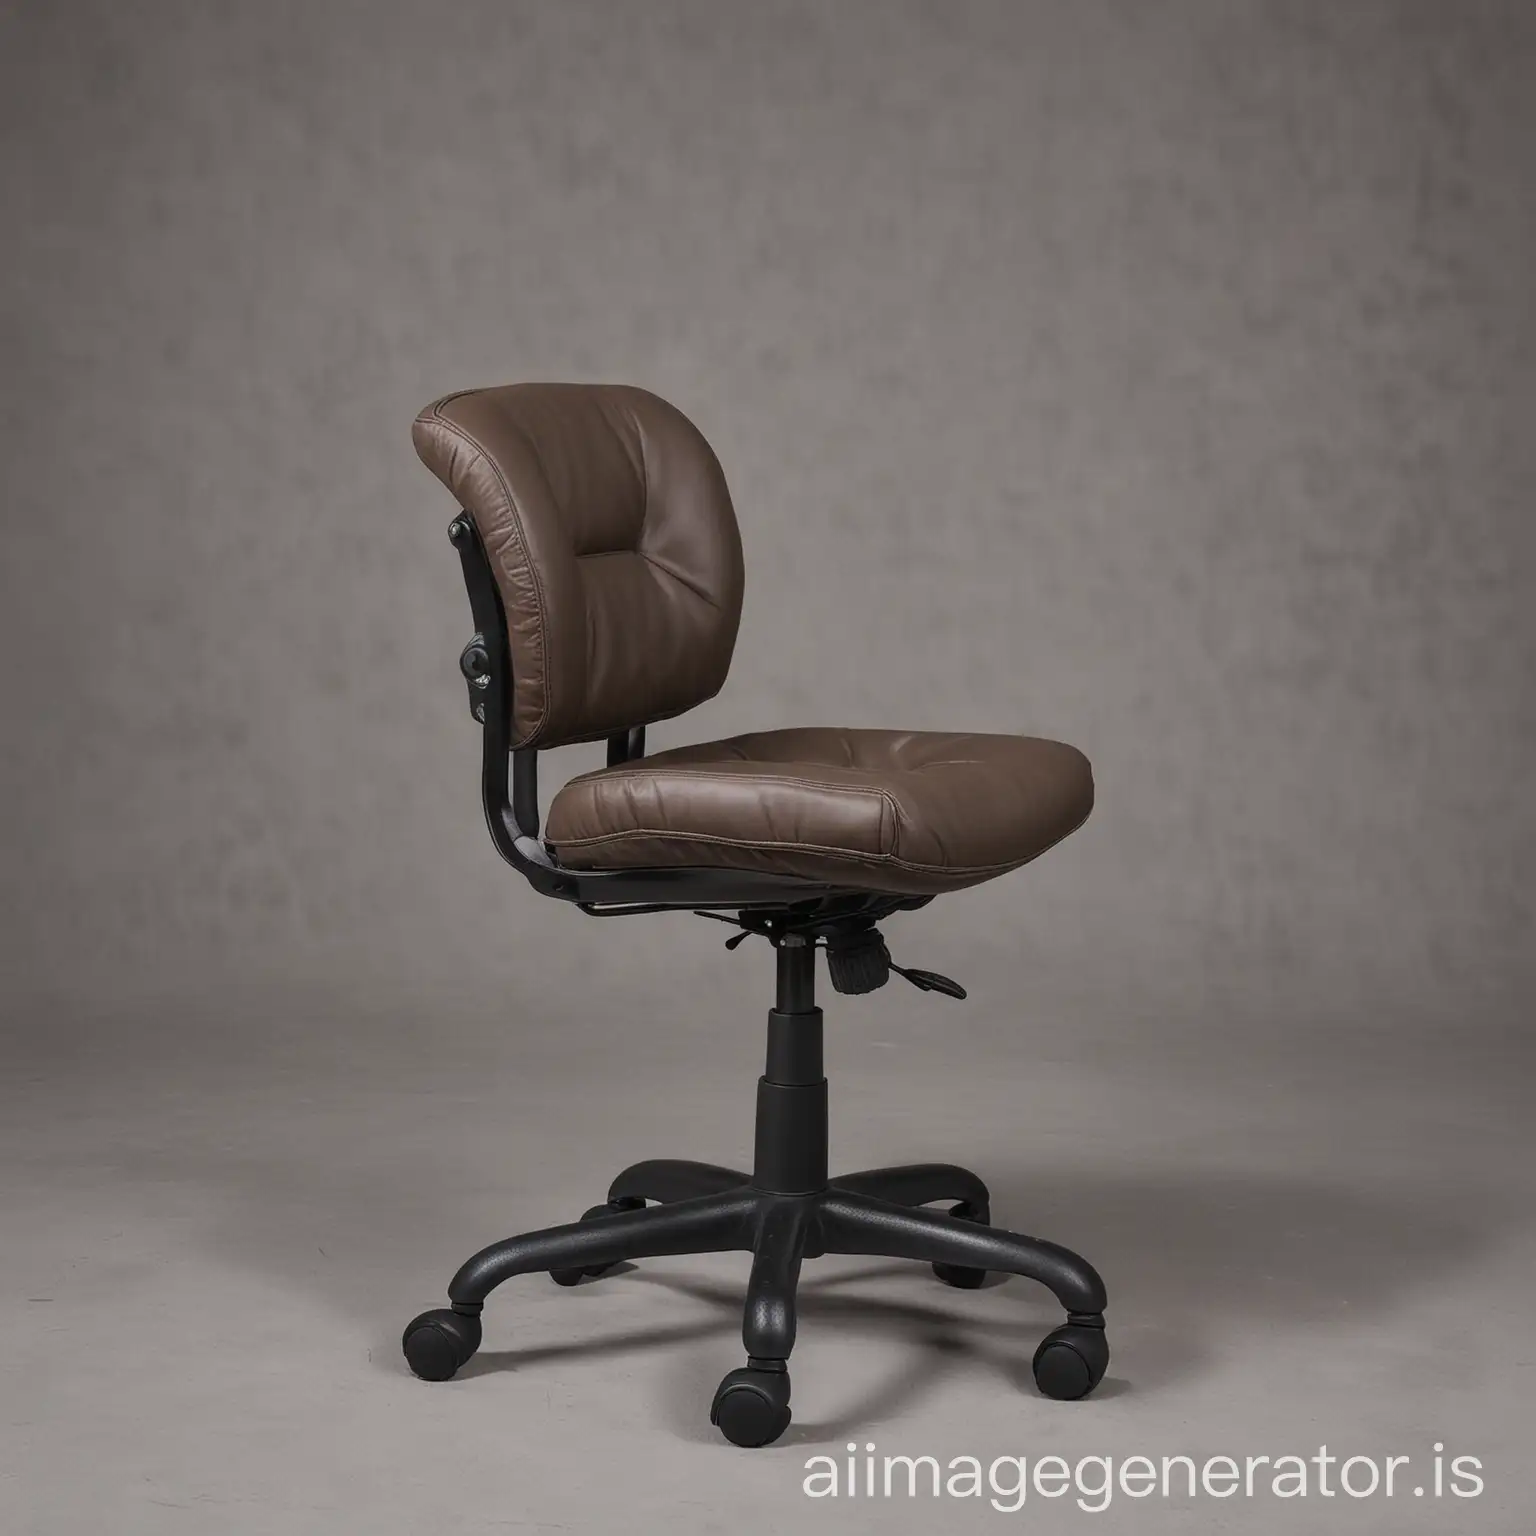 Variety-of-Office-Chairs-Breathable-Fabric-vs-Leather-Upholstery